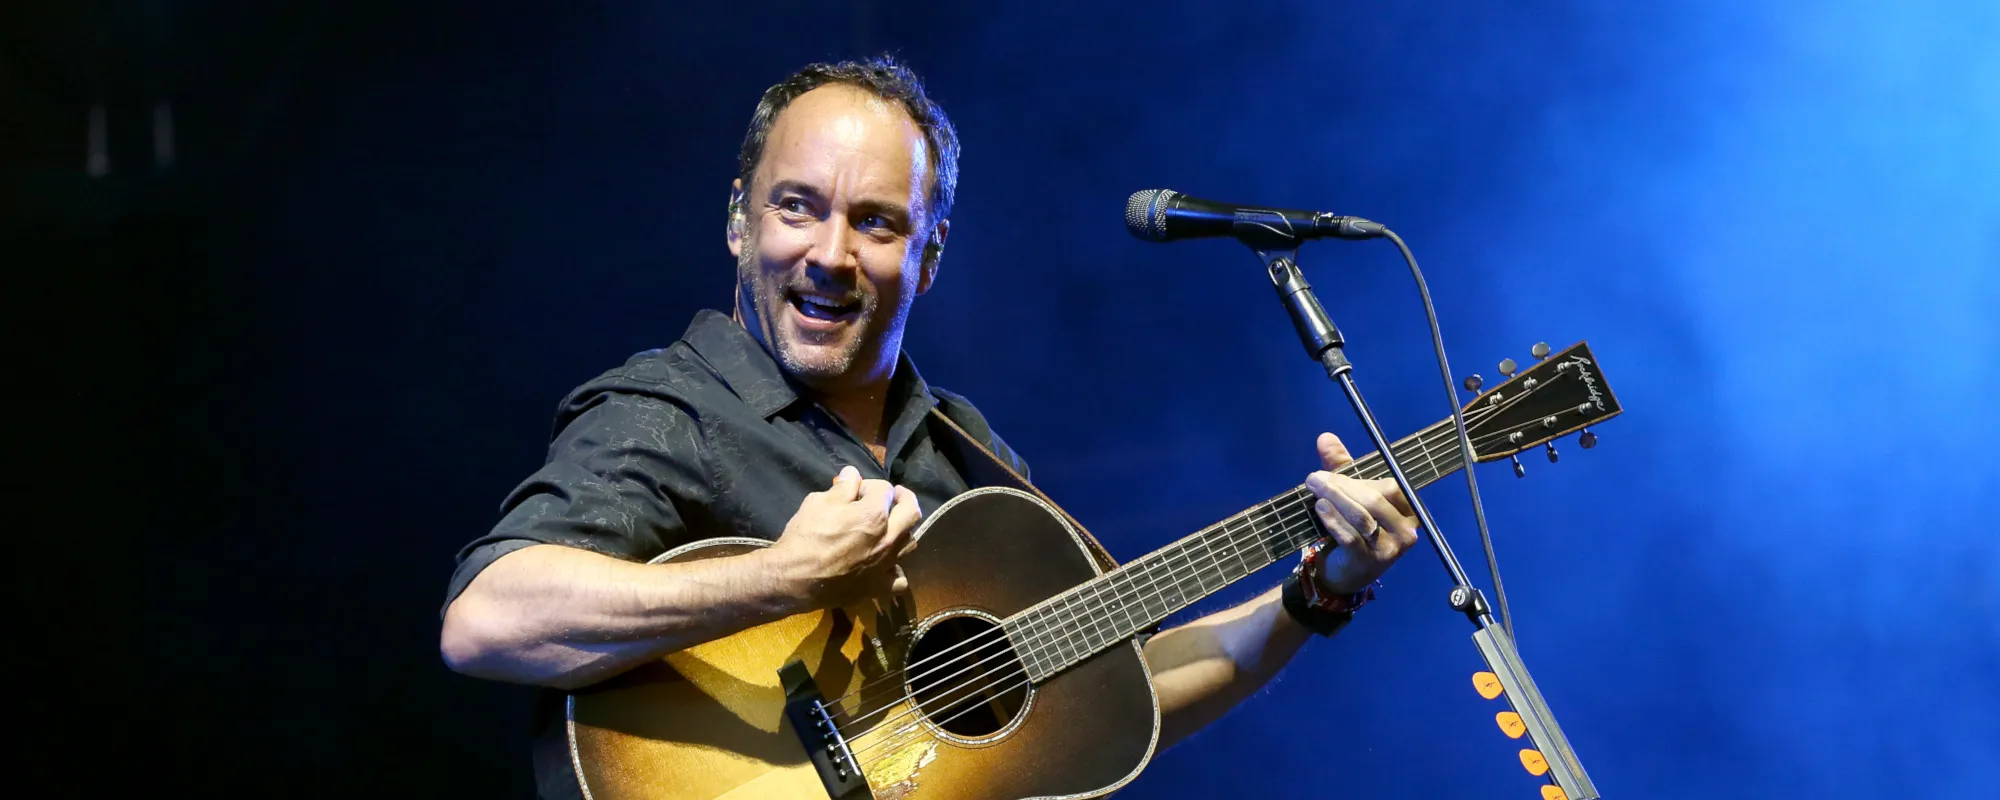 Behind the Meaning and the History of “Christmas Song” by Dave Matthews